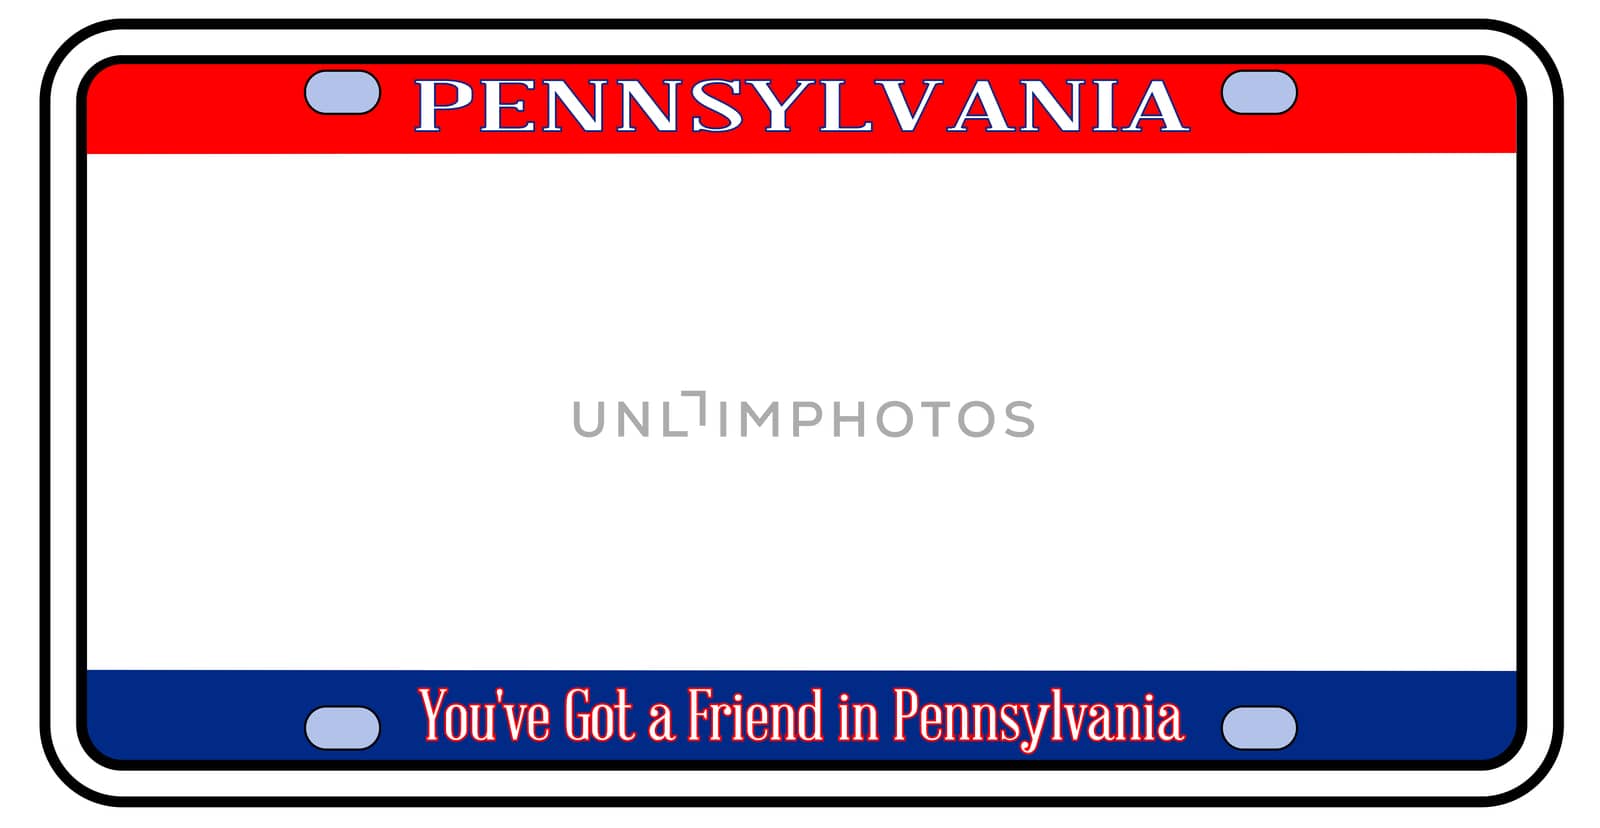 Blank Pennsylvania license plate in the colors of the state flag over a white background